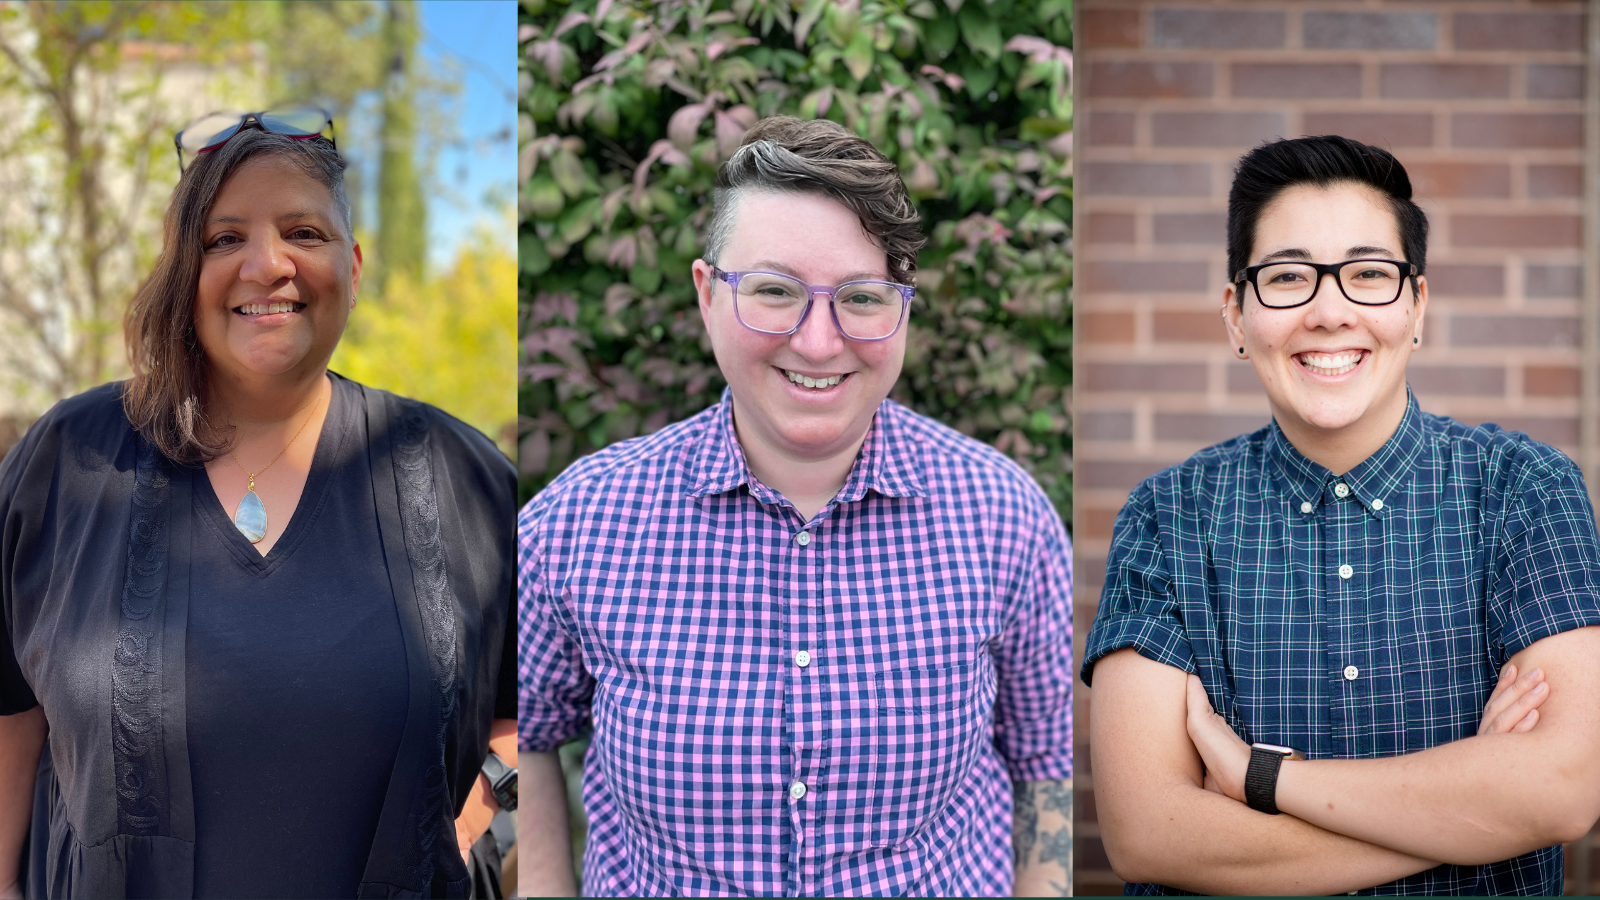 National Institute of Health grant awarded to collaborative research team studying experiences of resilience in transgender communities